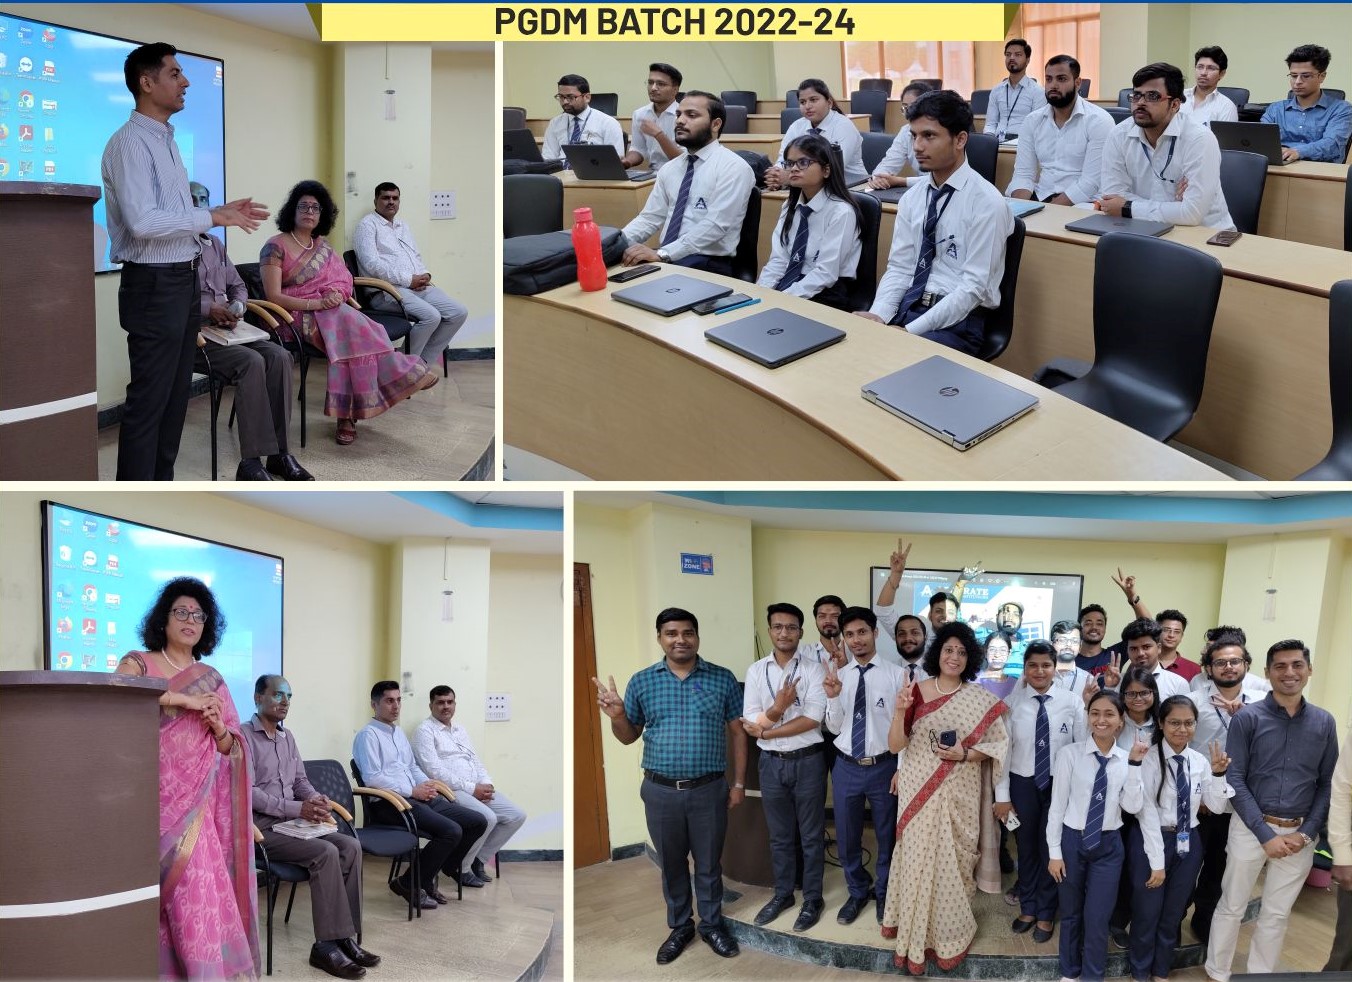 Two-Day Microsoft Excel Training Program Empowering PGDM Students for Successful Corporate Careers